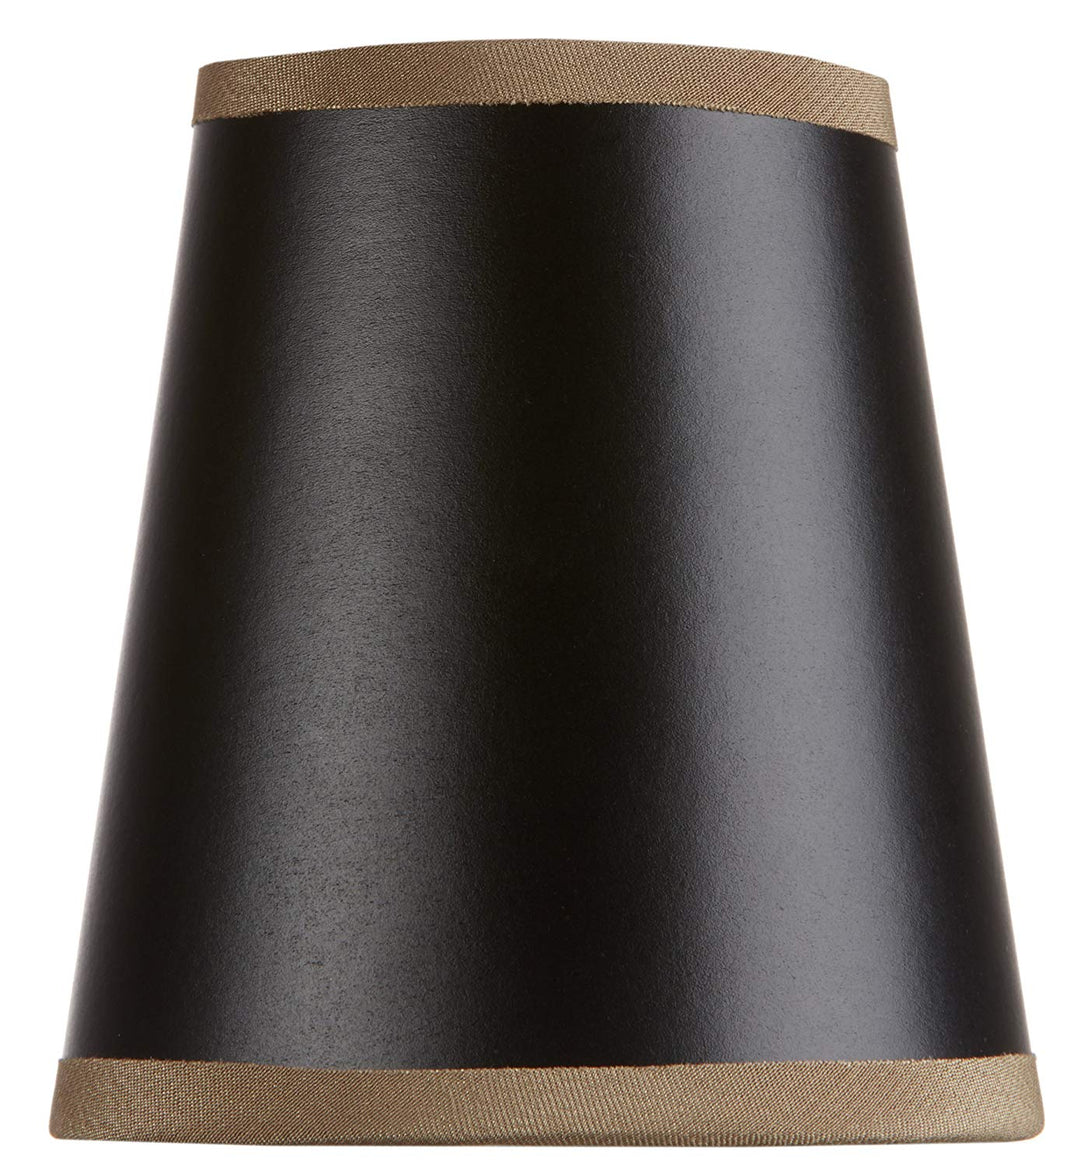 Upgradelights Black with Gold Trim 5 Inch Chandelier Shade 3x5x4 (Set of  6), Lampshades -  Canada